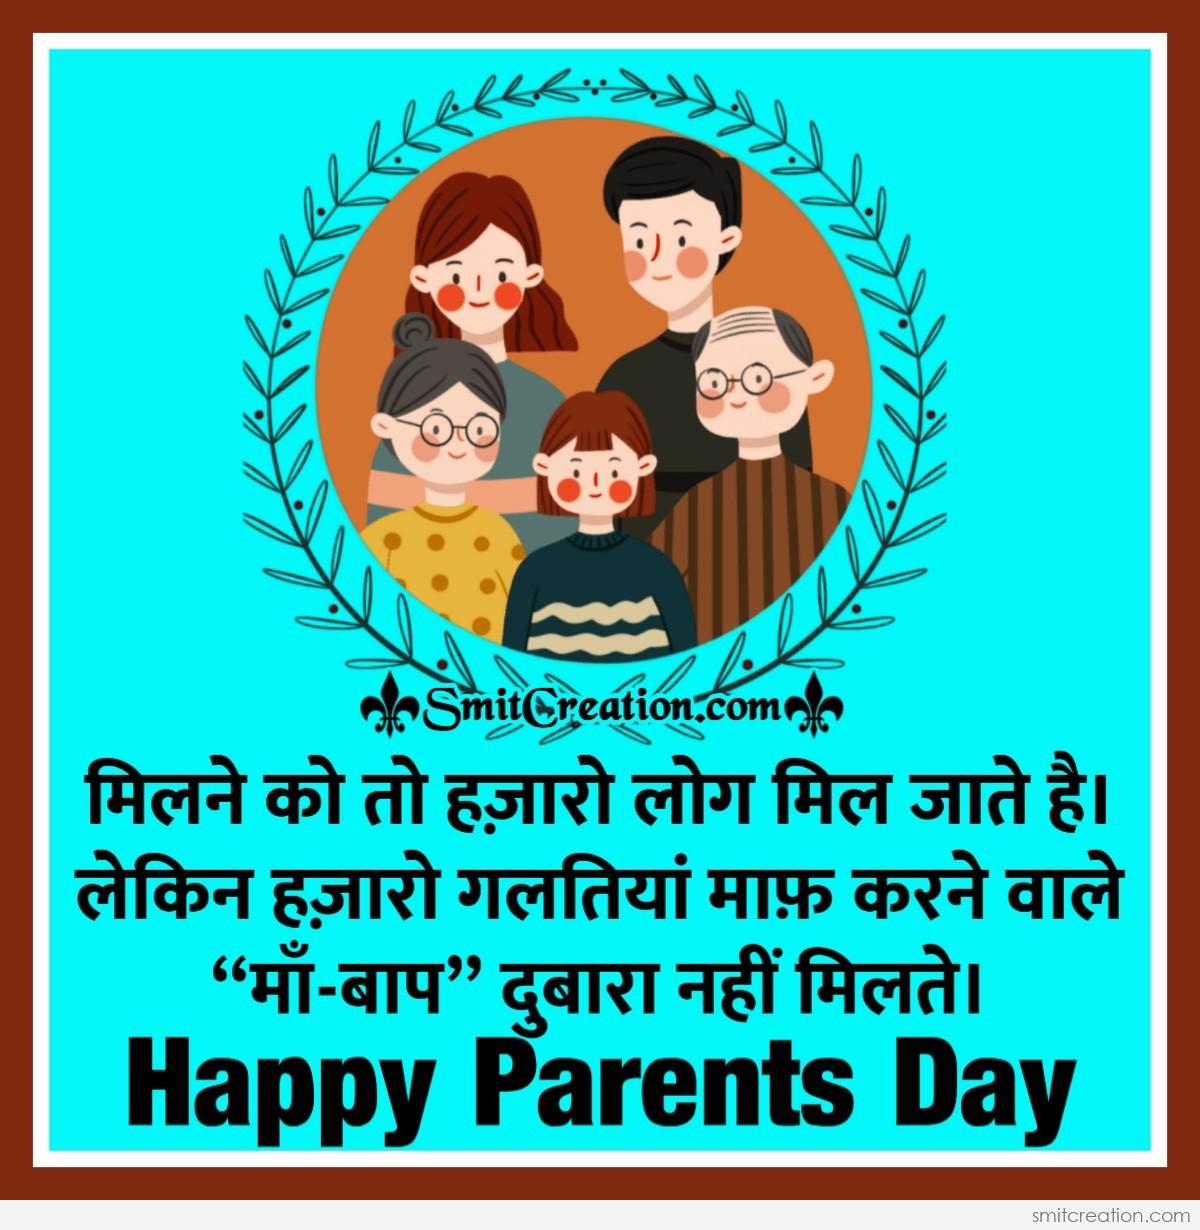 Happy Parents Day Wishes In Hindi